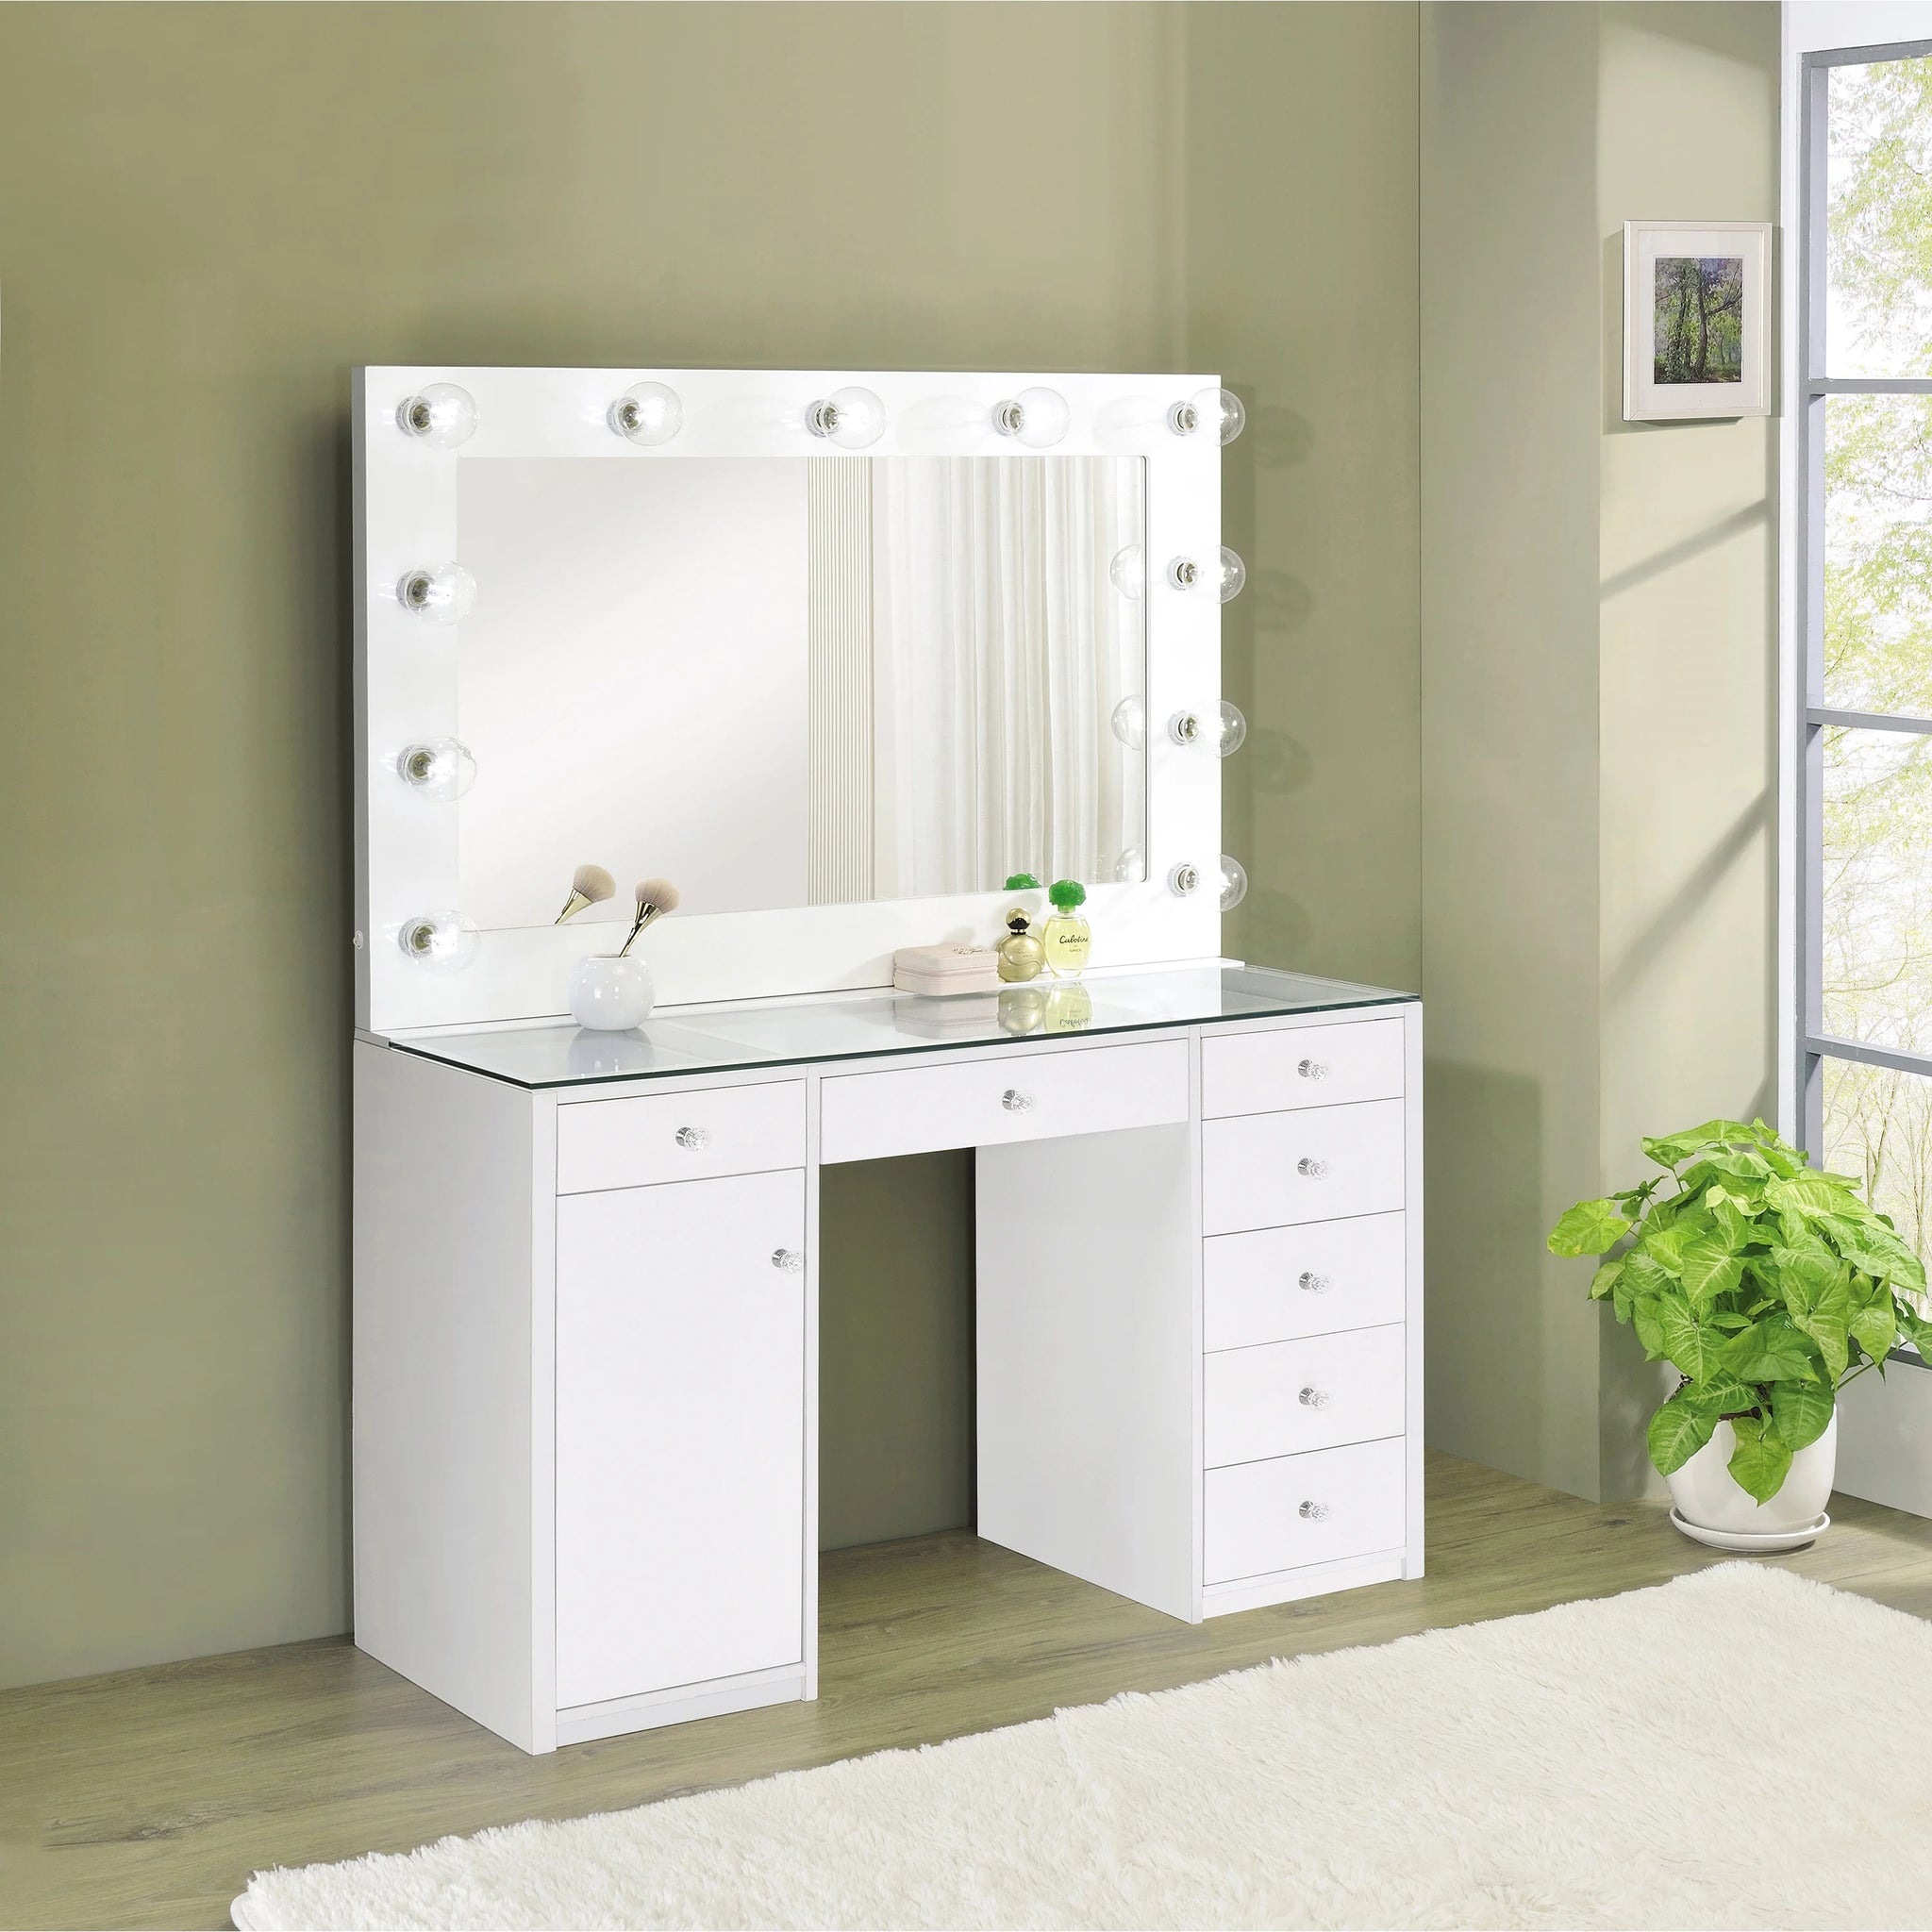 HYGGE CAVE | NEW BATHROOM VANITY ALERT: THESE 8 VANITIES WILL UP YOUR STYLE GAME